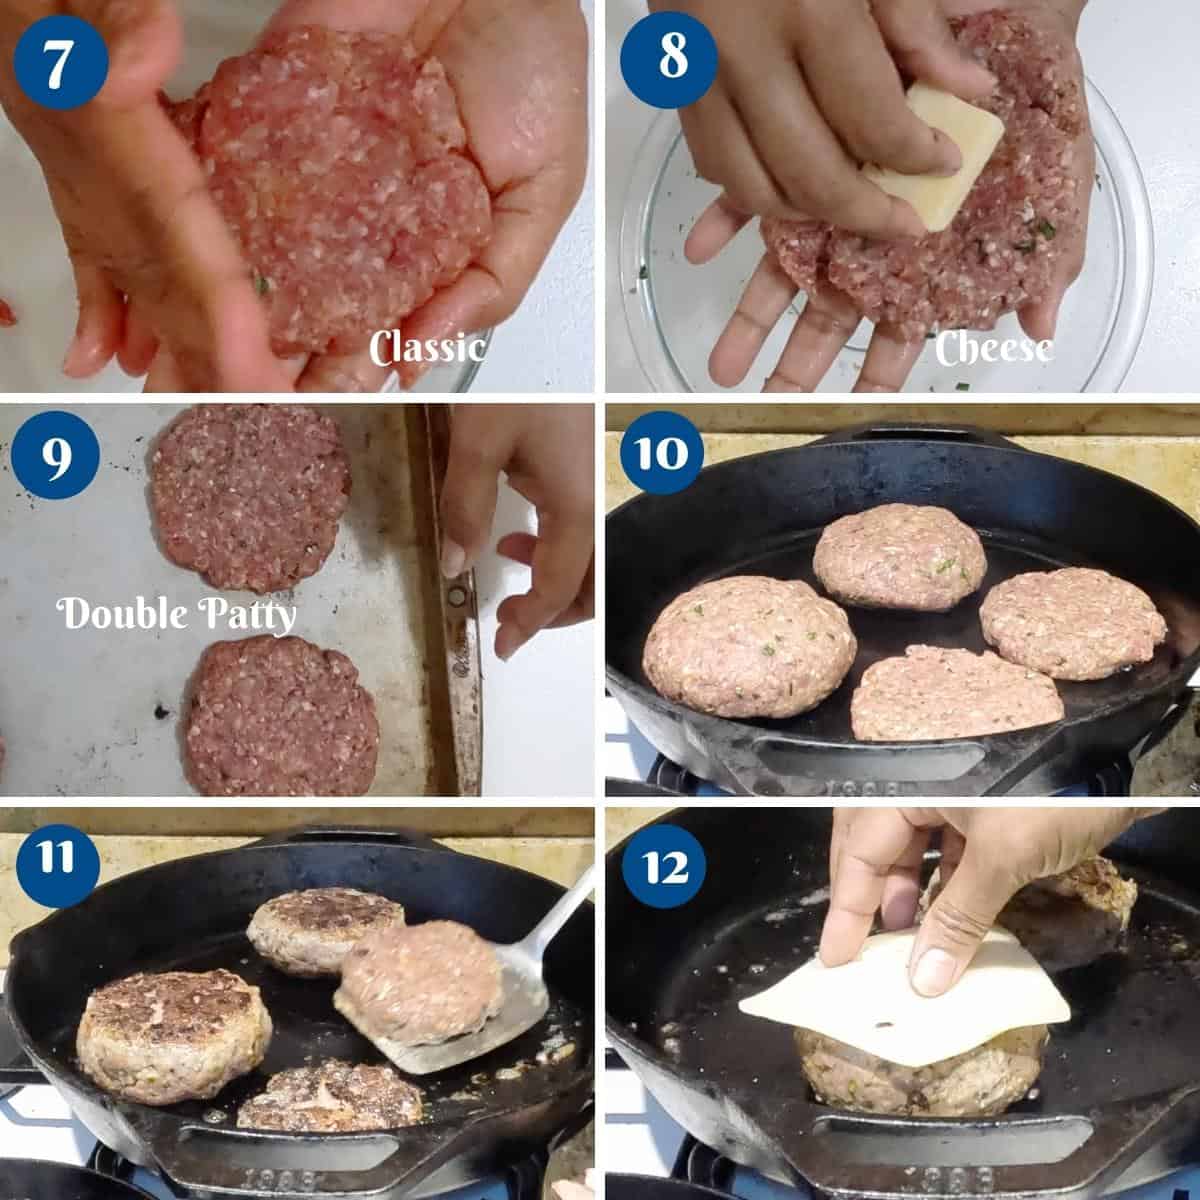 Progress pictures shaping and grilling the hamburgers.